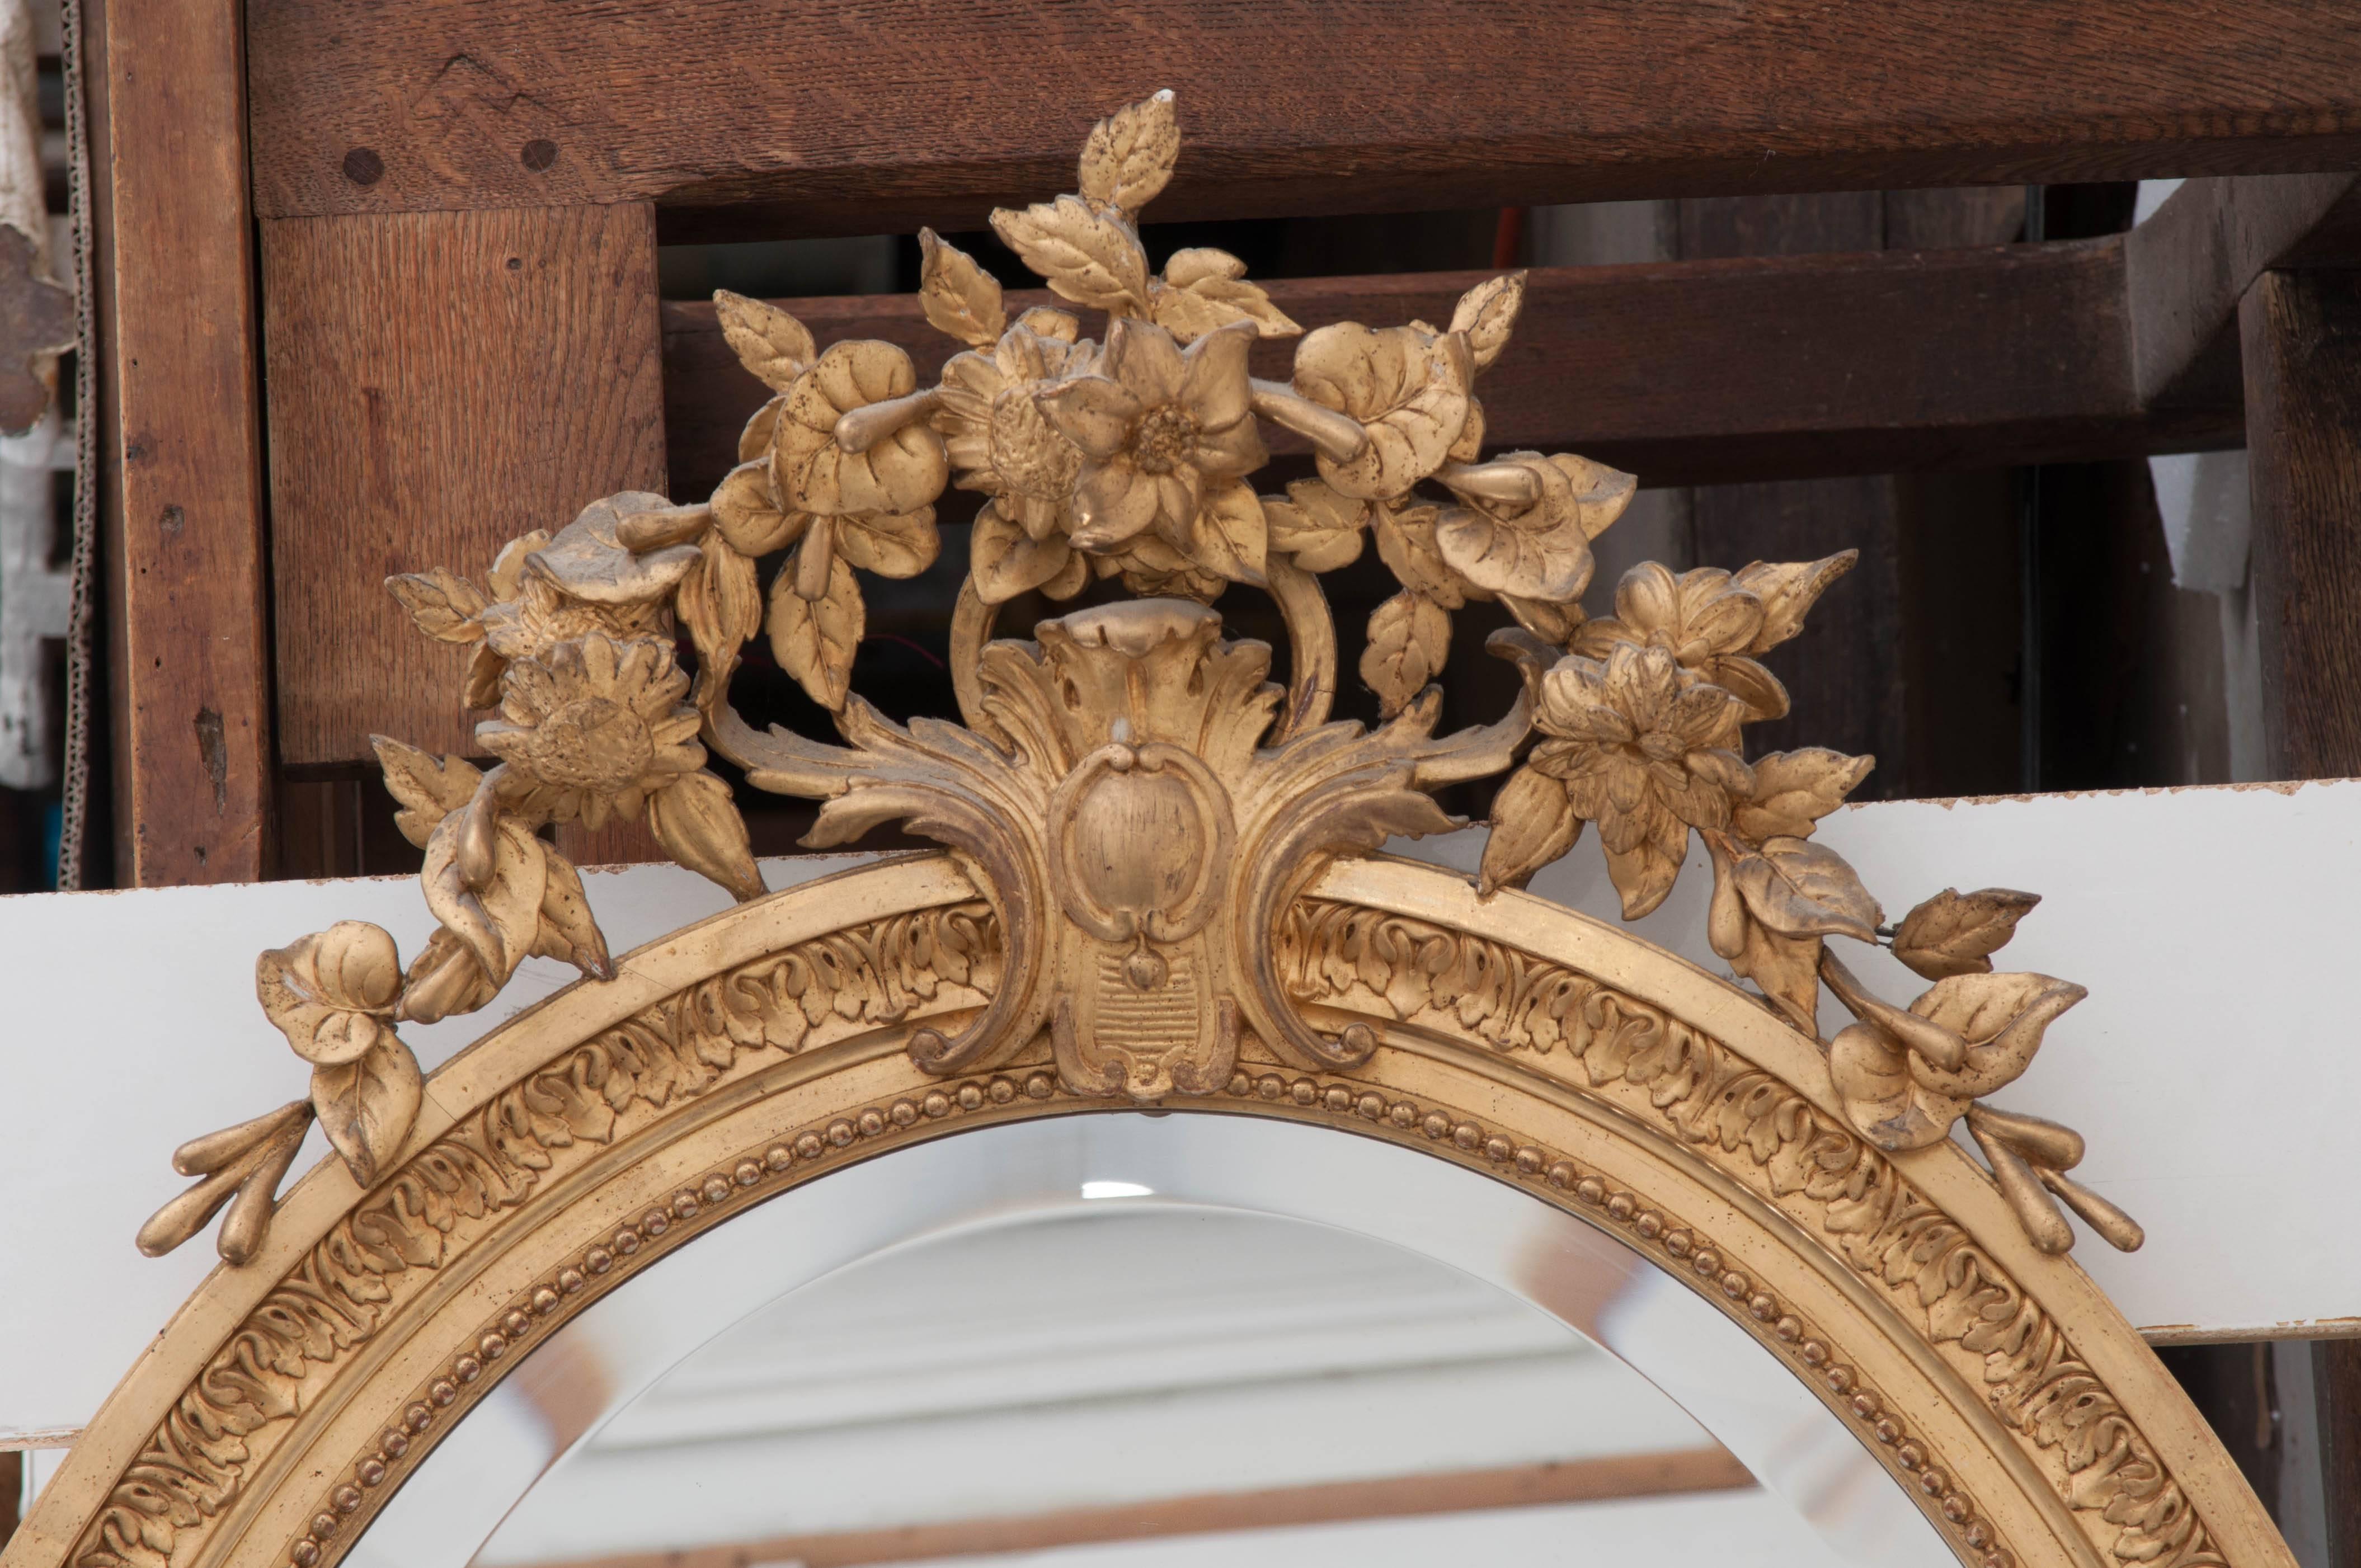 Fanciful and fun, this 19th century French oval gold gilt mirror boasts intricate, carved details from top to bottom. A carved garland of flowering vines crowns the brilliant mirror, with cartouches of flowing acanthus leaves at the top, bottom, and